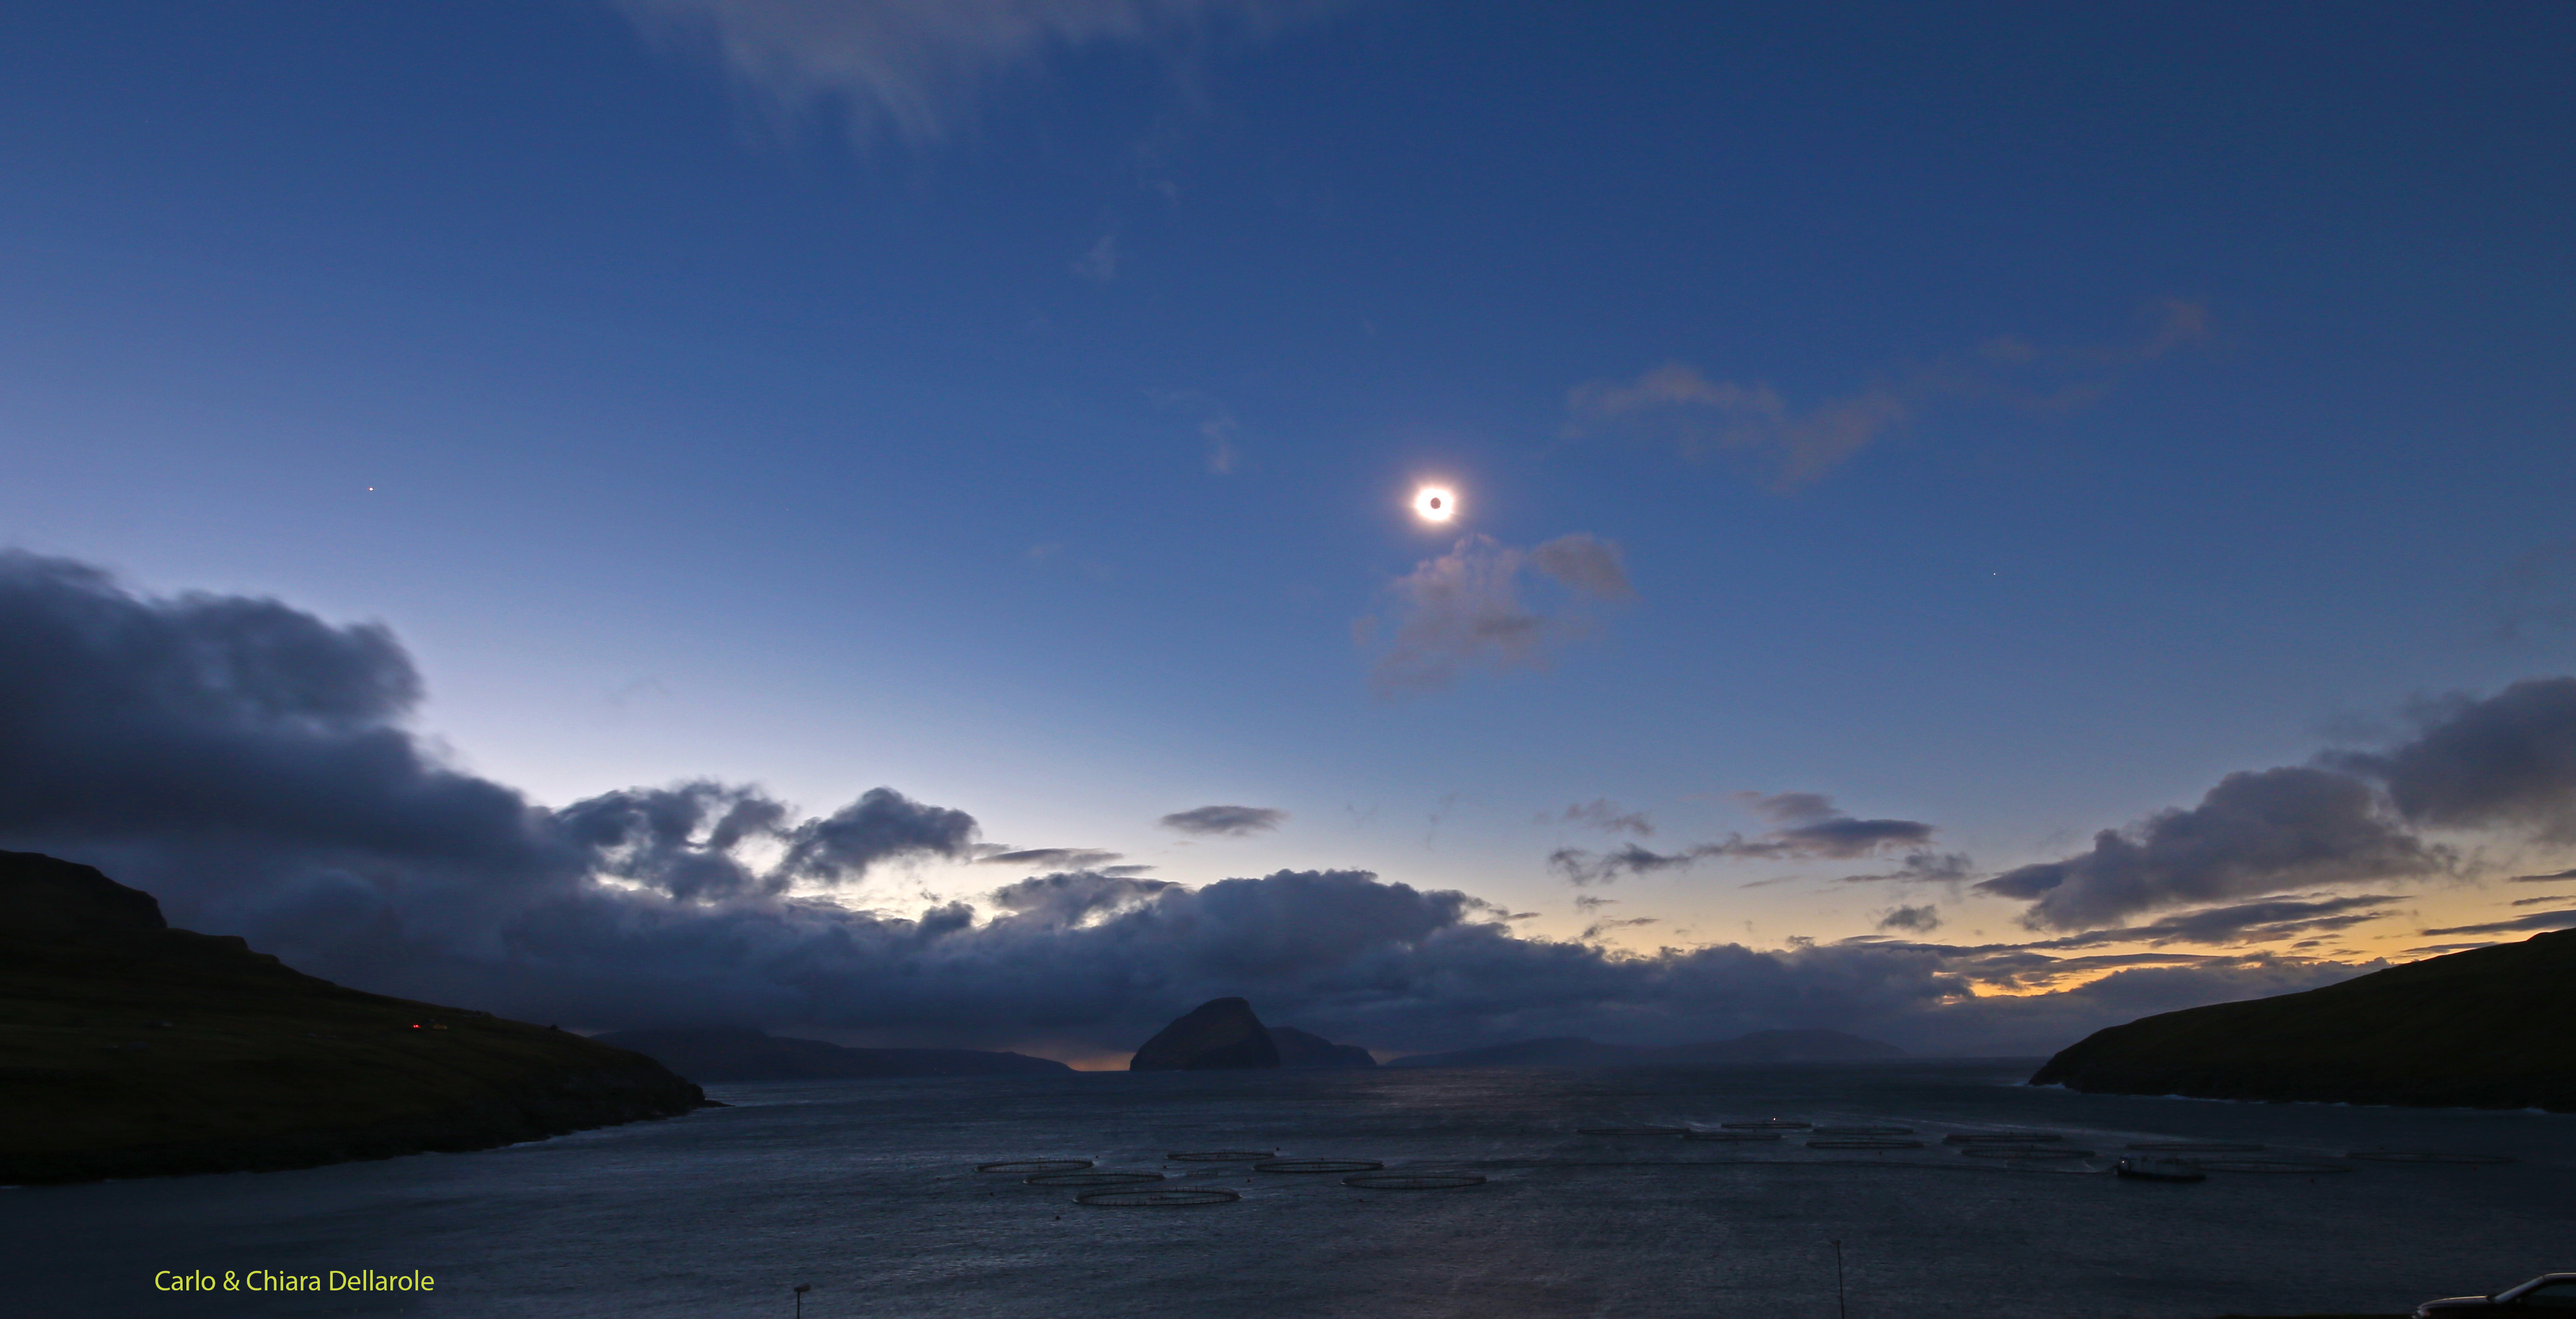 Panoramic of Total sun eclipse photographed from Fær Øer Islands: 2.100 KB; click on the image to enlarge